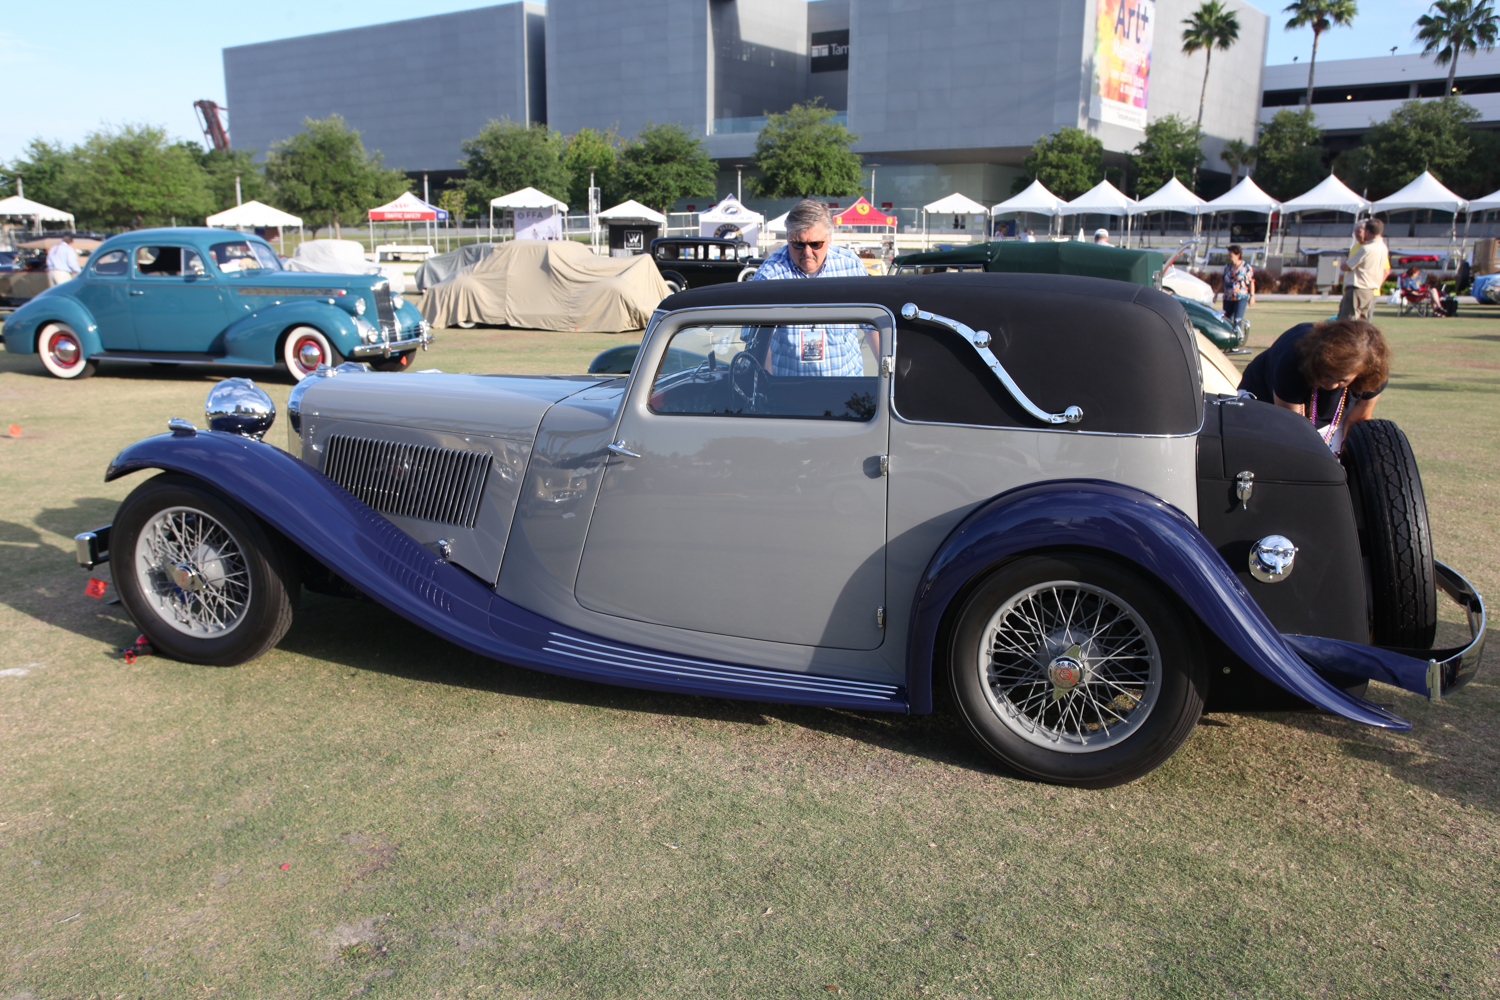 The Zavalas did a good job preparing their SS1 Coupe; it won Best of Show, Concours de Sport.